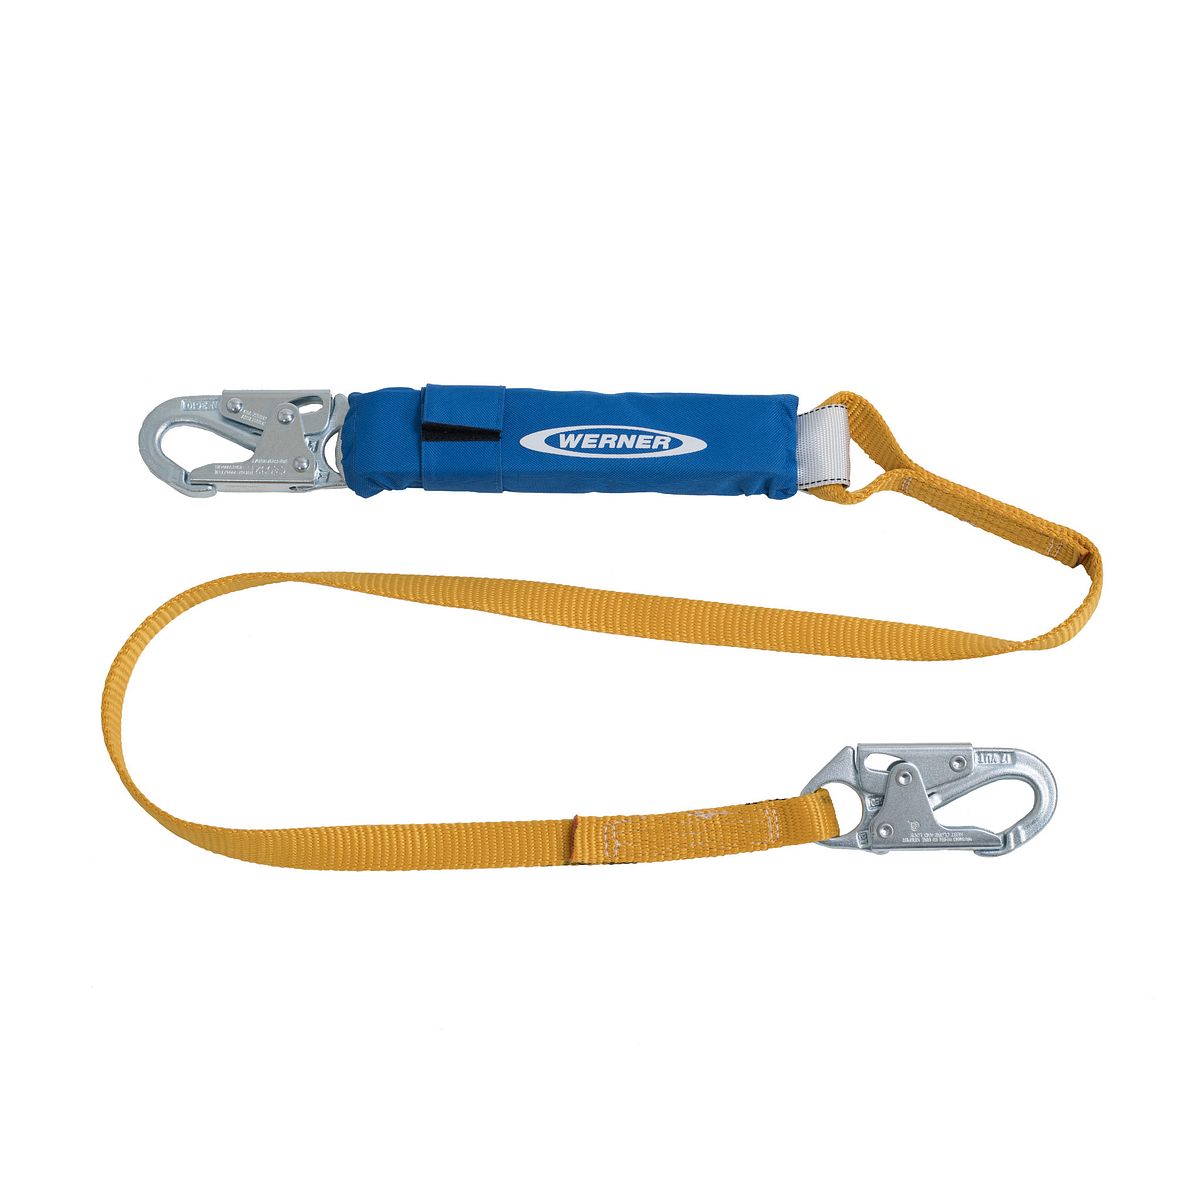 Werner DeCoil 6 Foot Shock Absorbing Lanyard from Columbia Safety